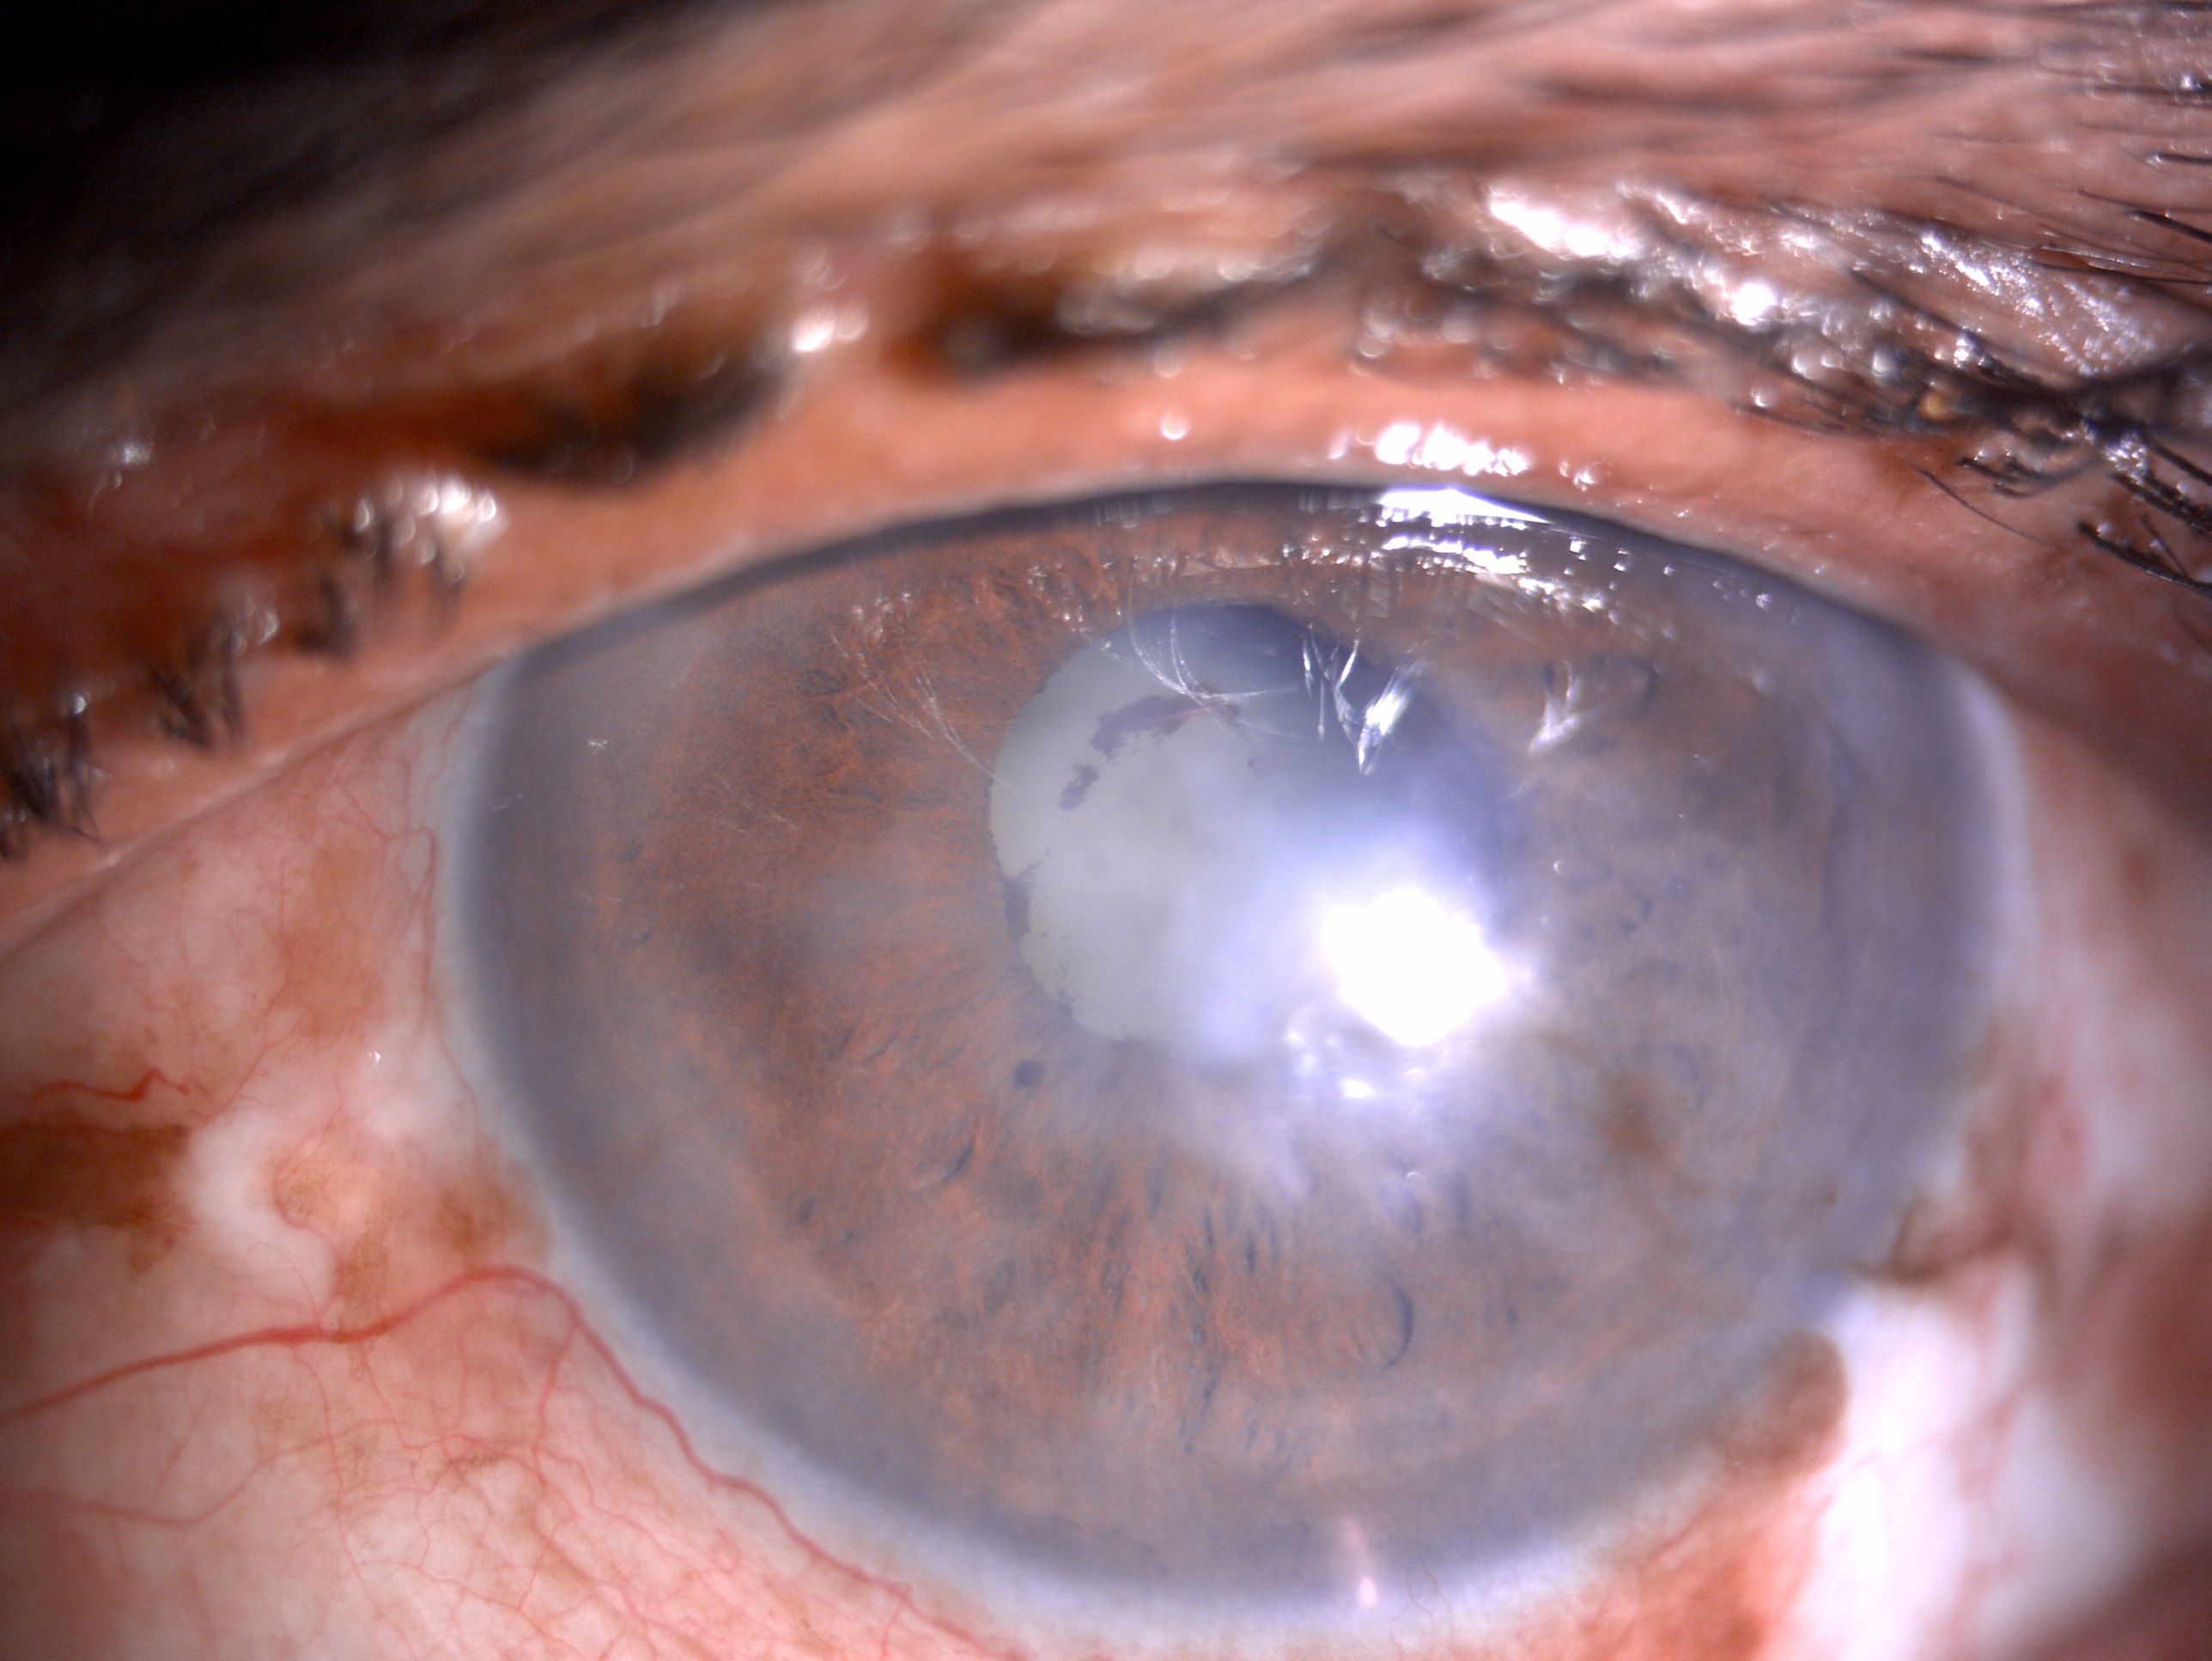 Slit- lamp image of the patient with recurrent uveitis depicting mild circumciliary congestion, nebular corneal scarring, few areas of iris atrophy along with a complicated cataract